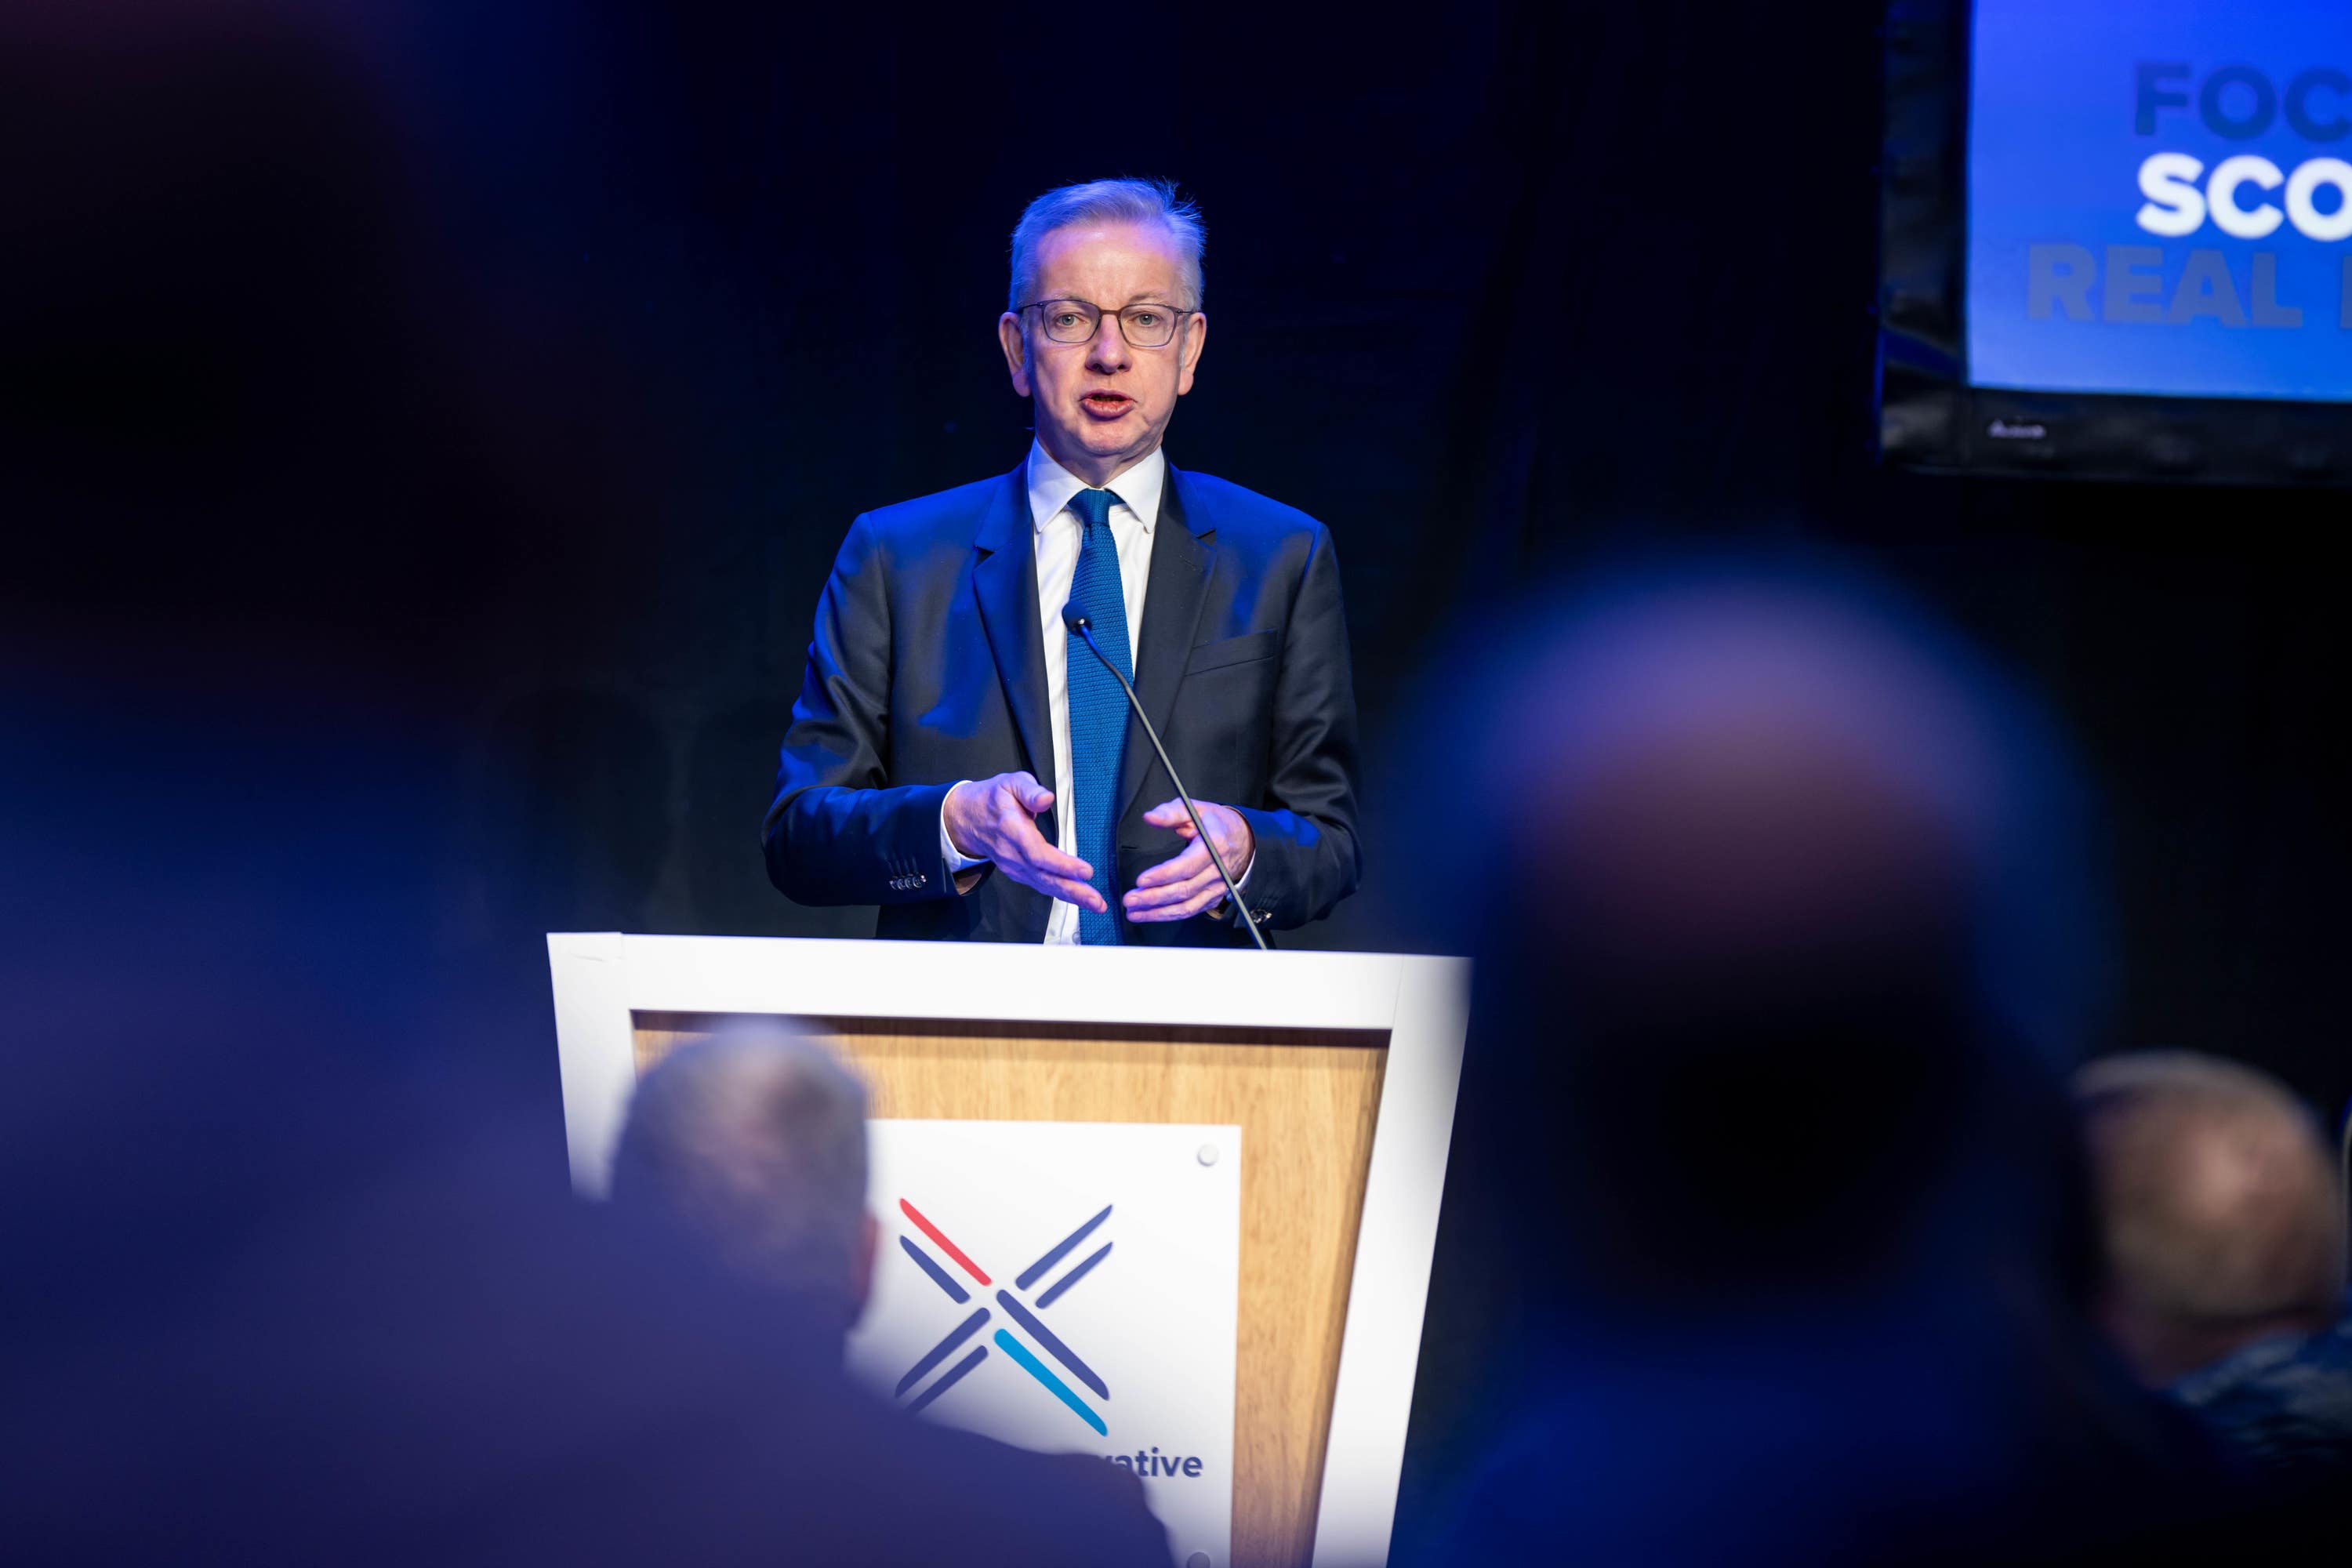 Michael Gove also used his speech to attack the SNP.